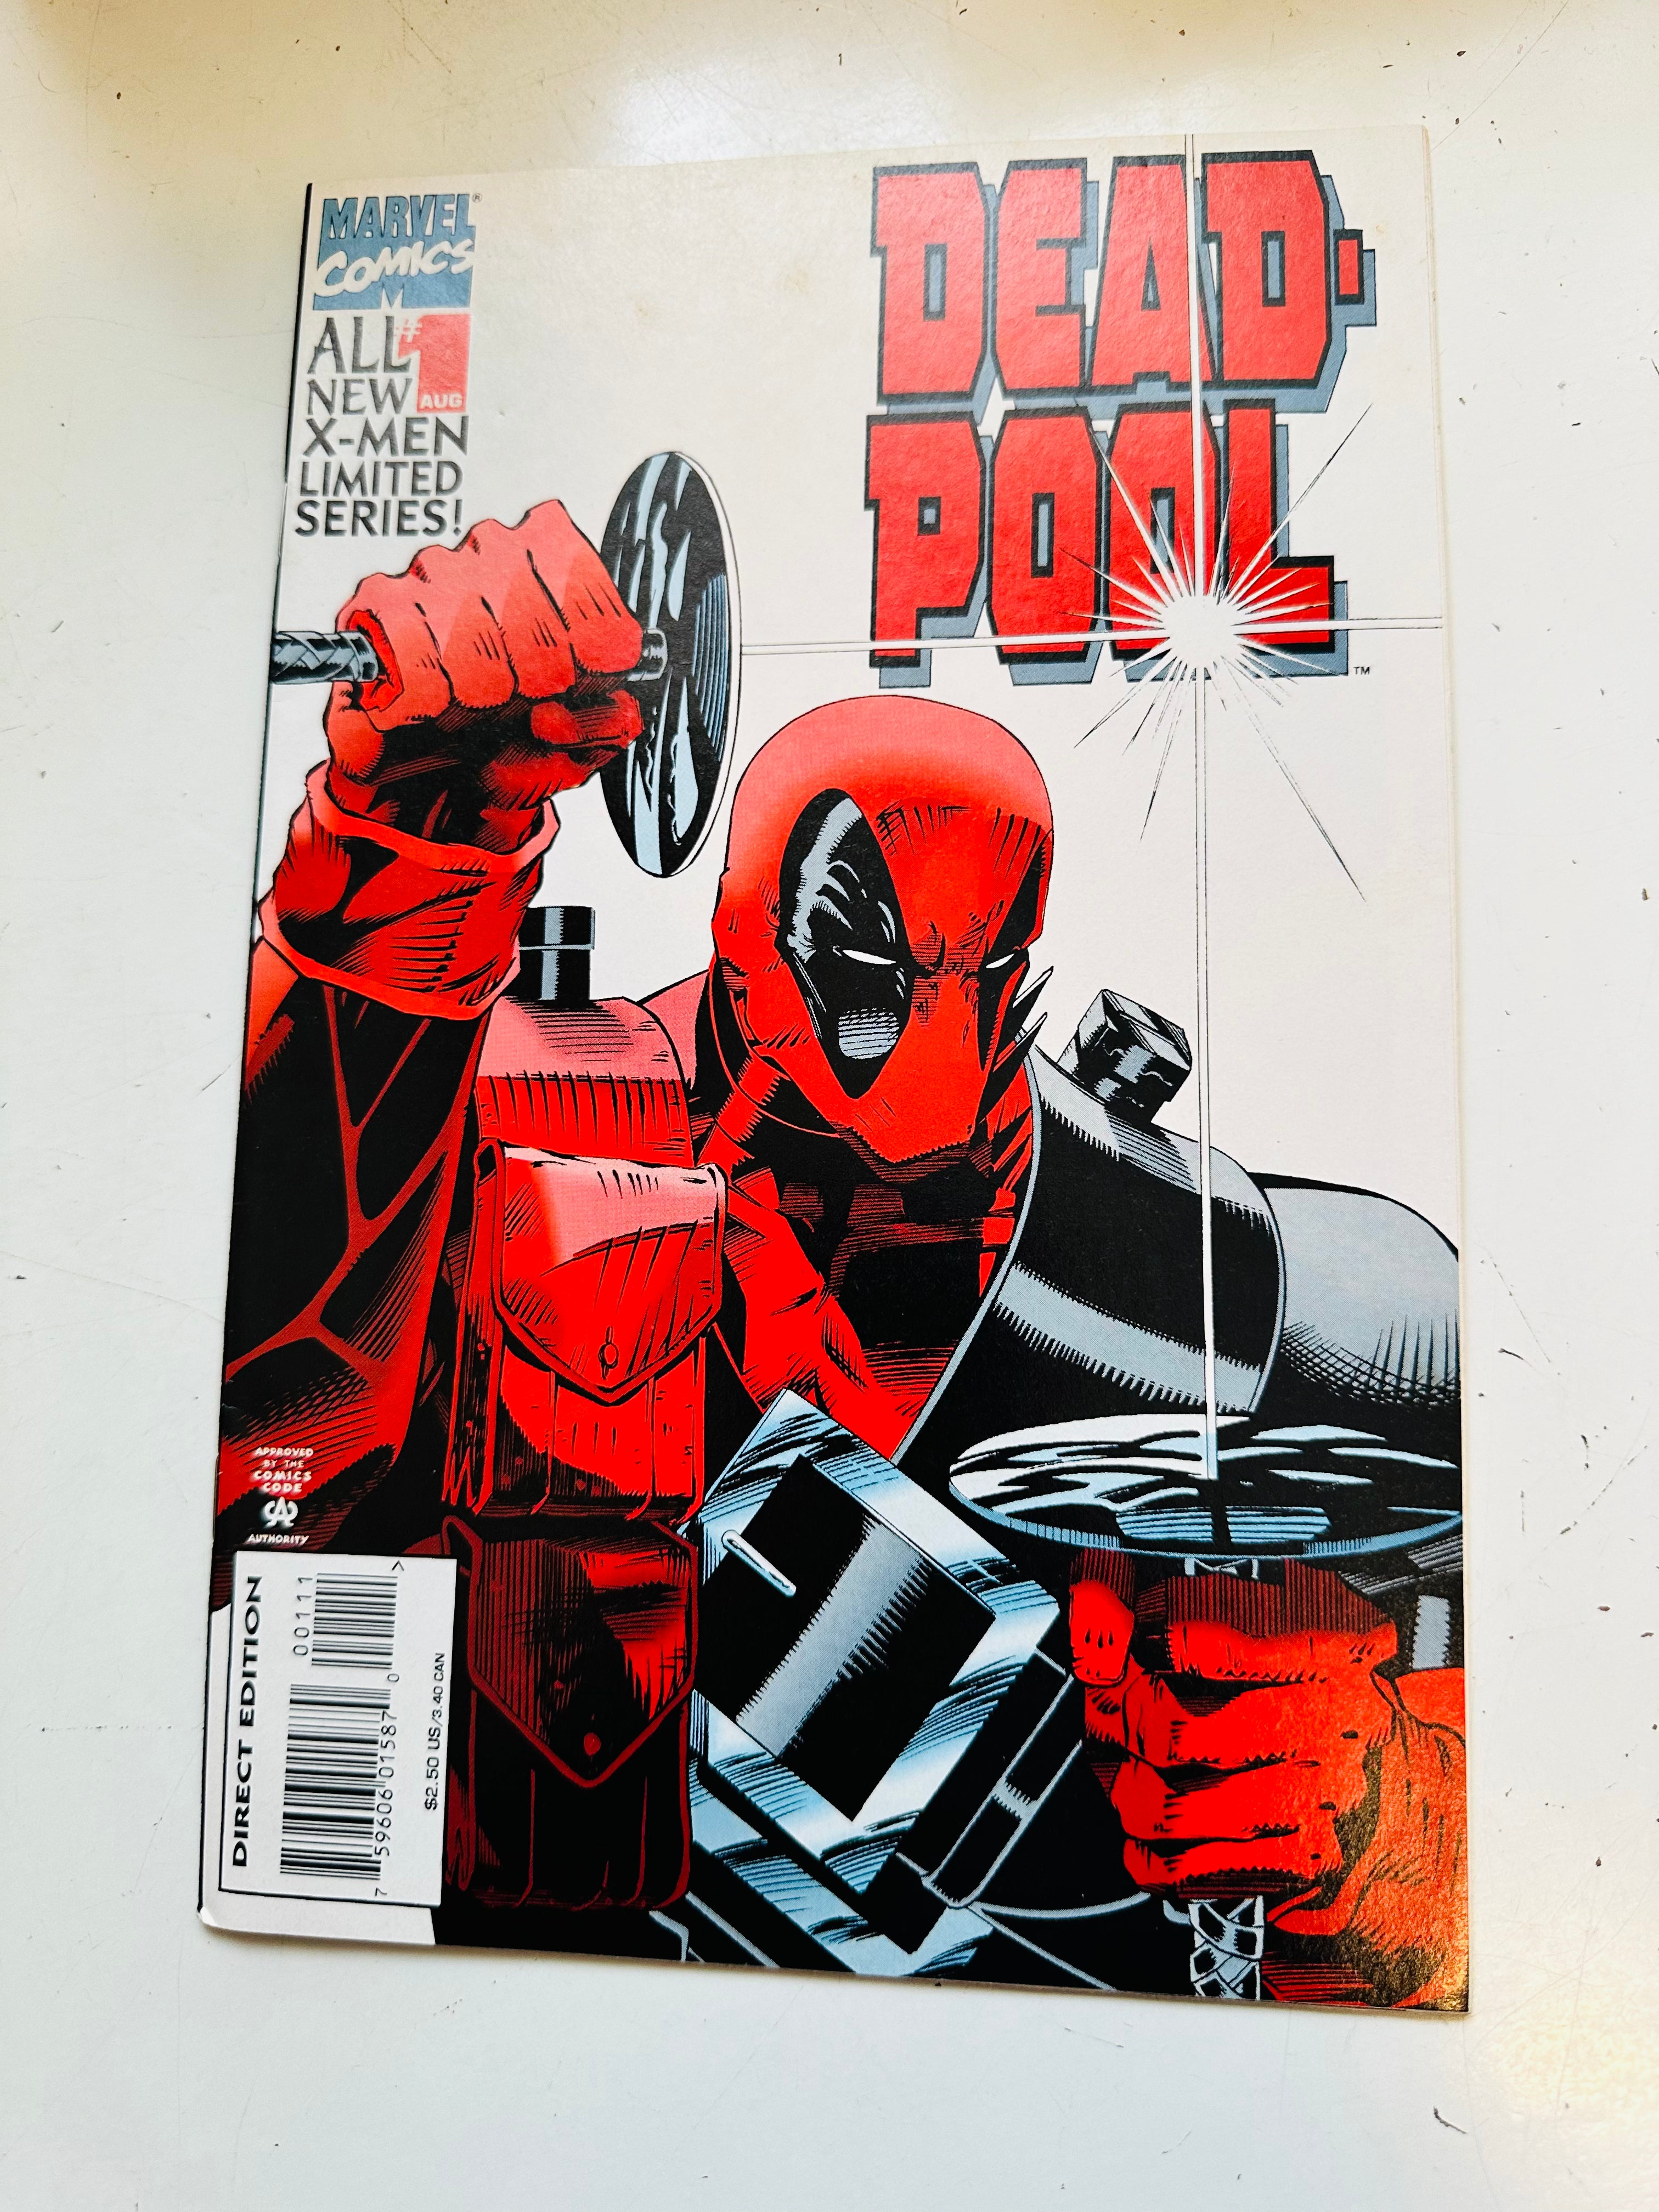 Deadpool number one comic Limited series 1994